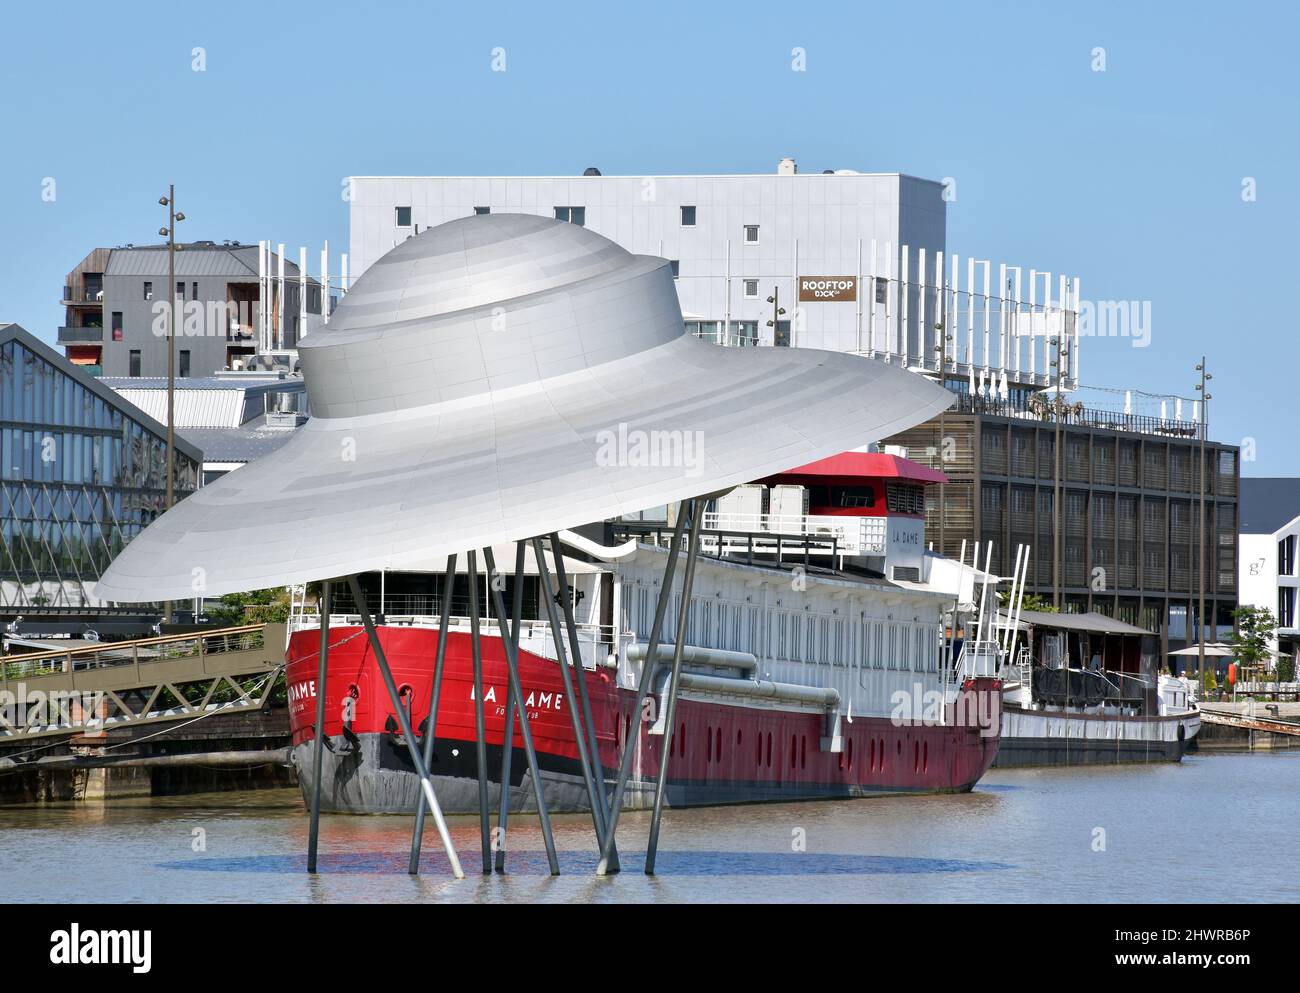 Sculpture entitled Bordeaux Ship, sculptor Suzanne Treister, imagining metamorphosis of a WW2 shipwreck into a space ship, dreams of a betterr future Stock Photo